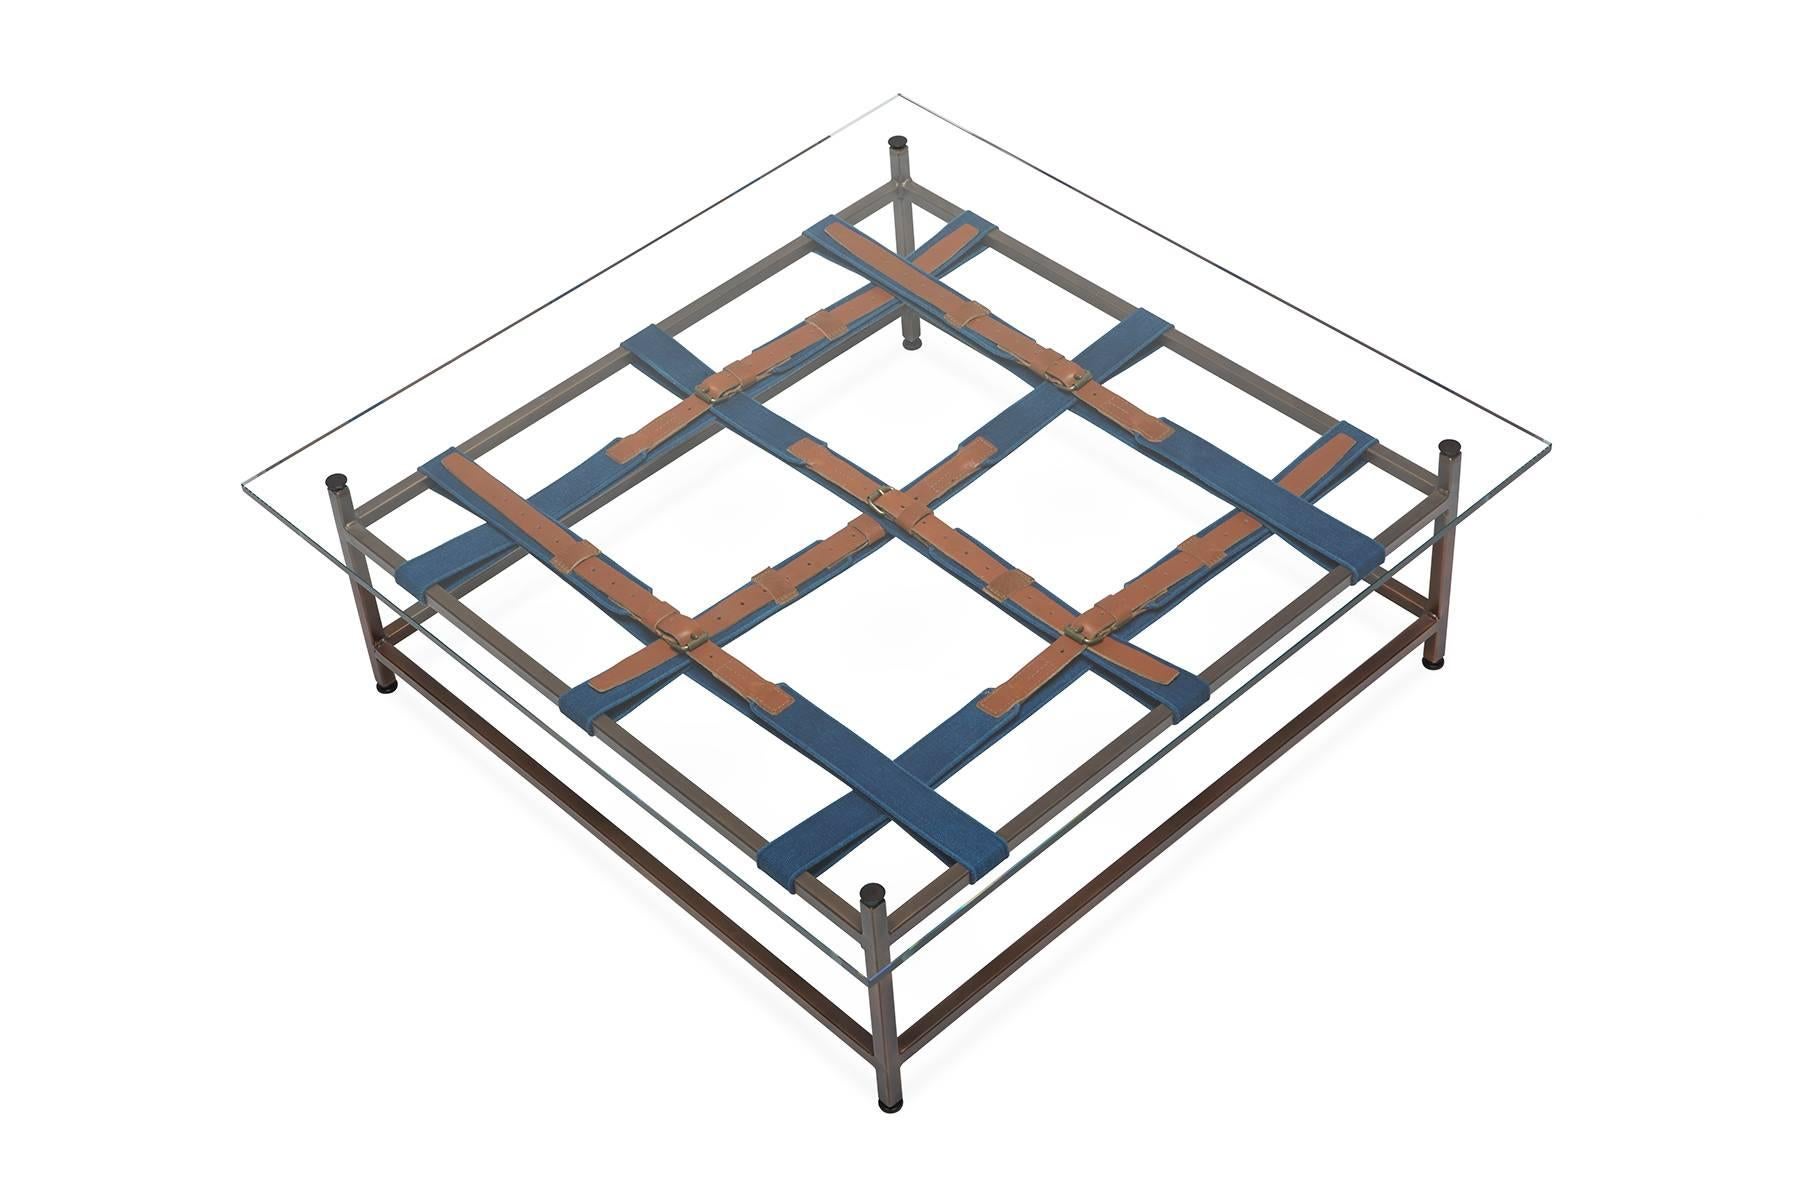 A glass topped coffee table that utilizes the signature Inheritance collection belts. This version was made to pair with the hand-dyed indigo canvas and antique copper sofa. The steel frame has an antique copper finish and naturally dyed indigo